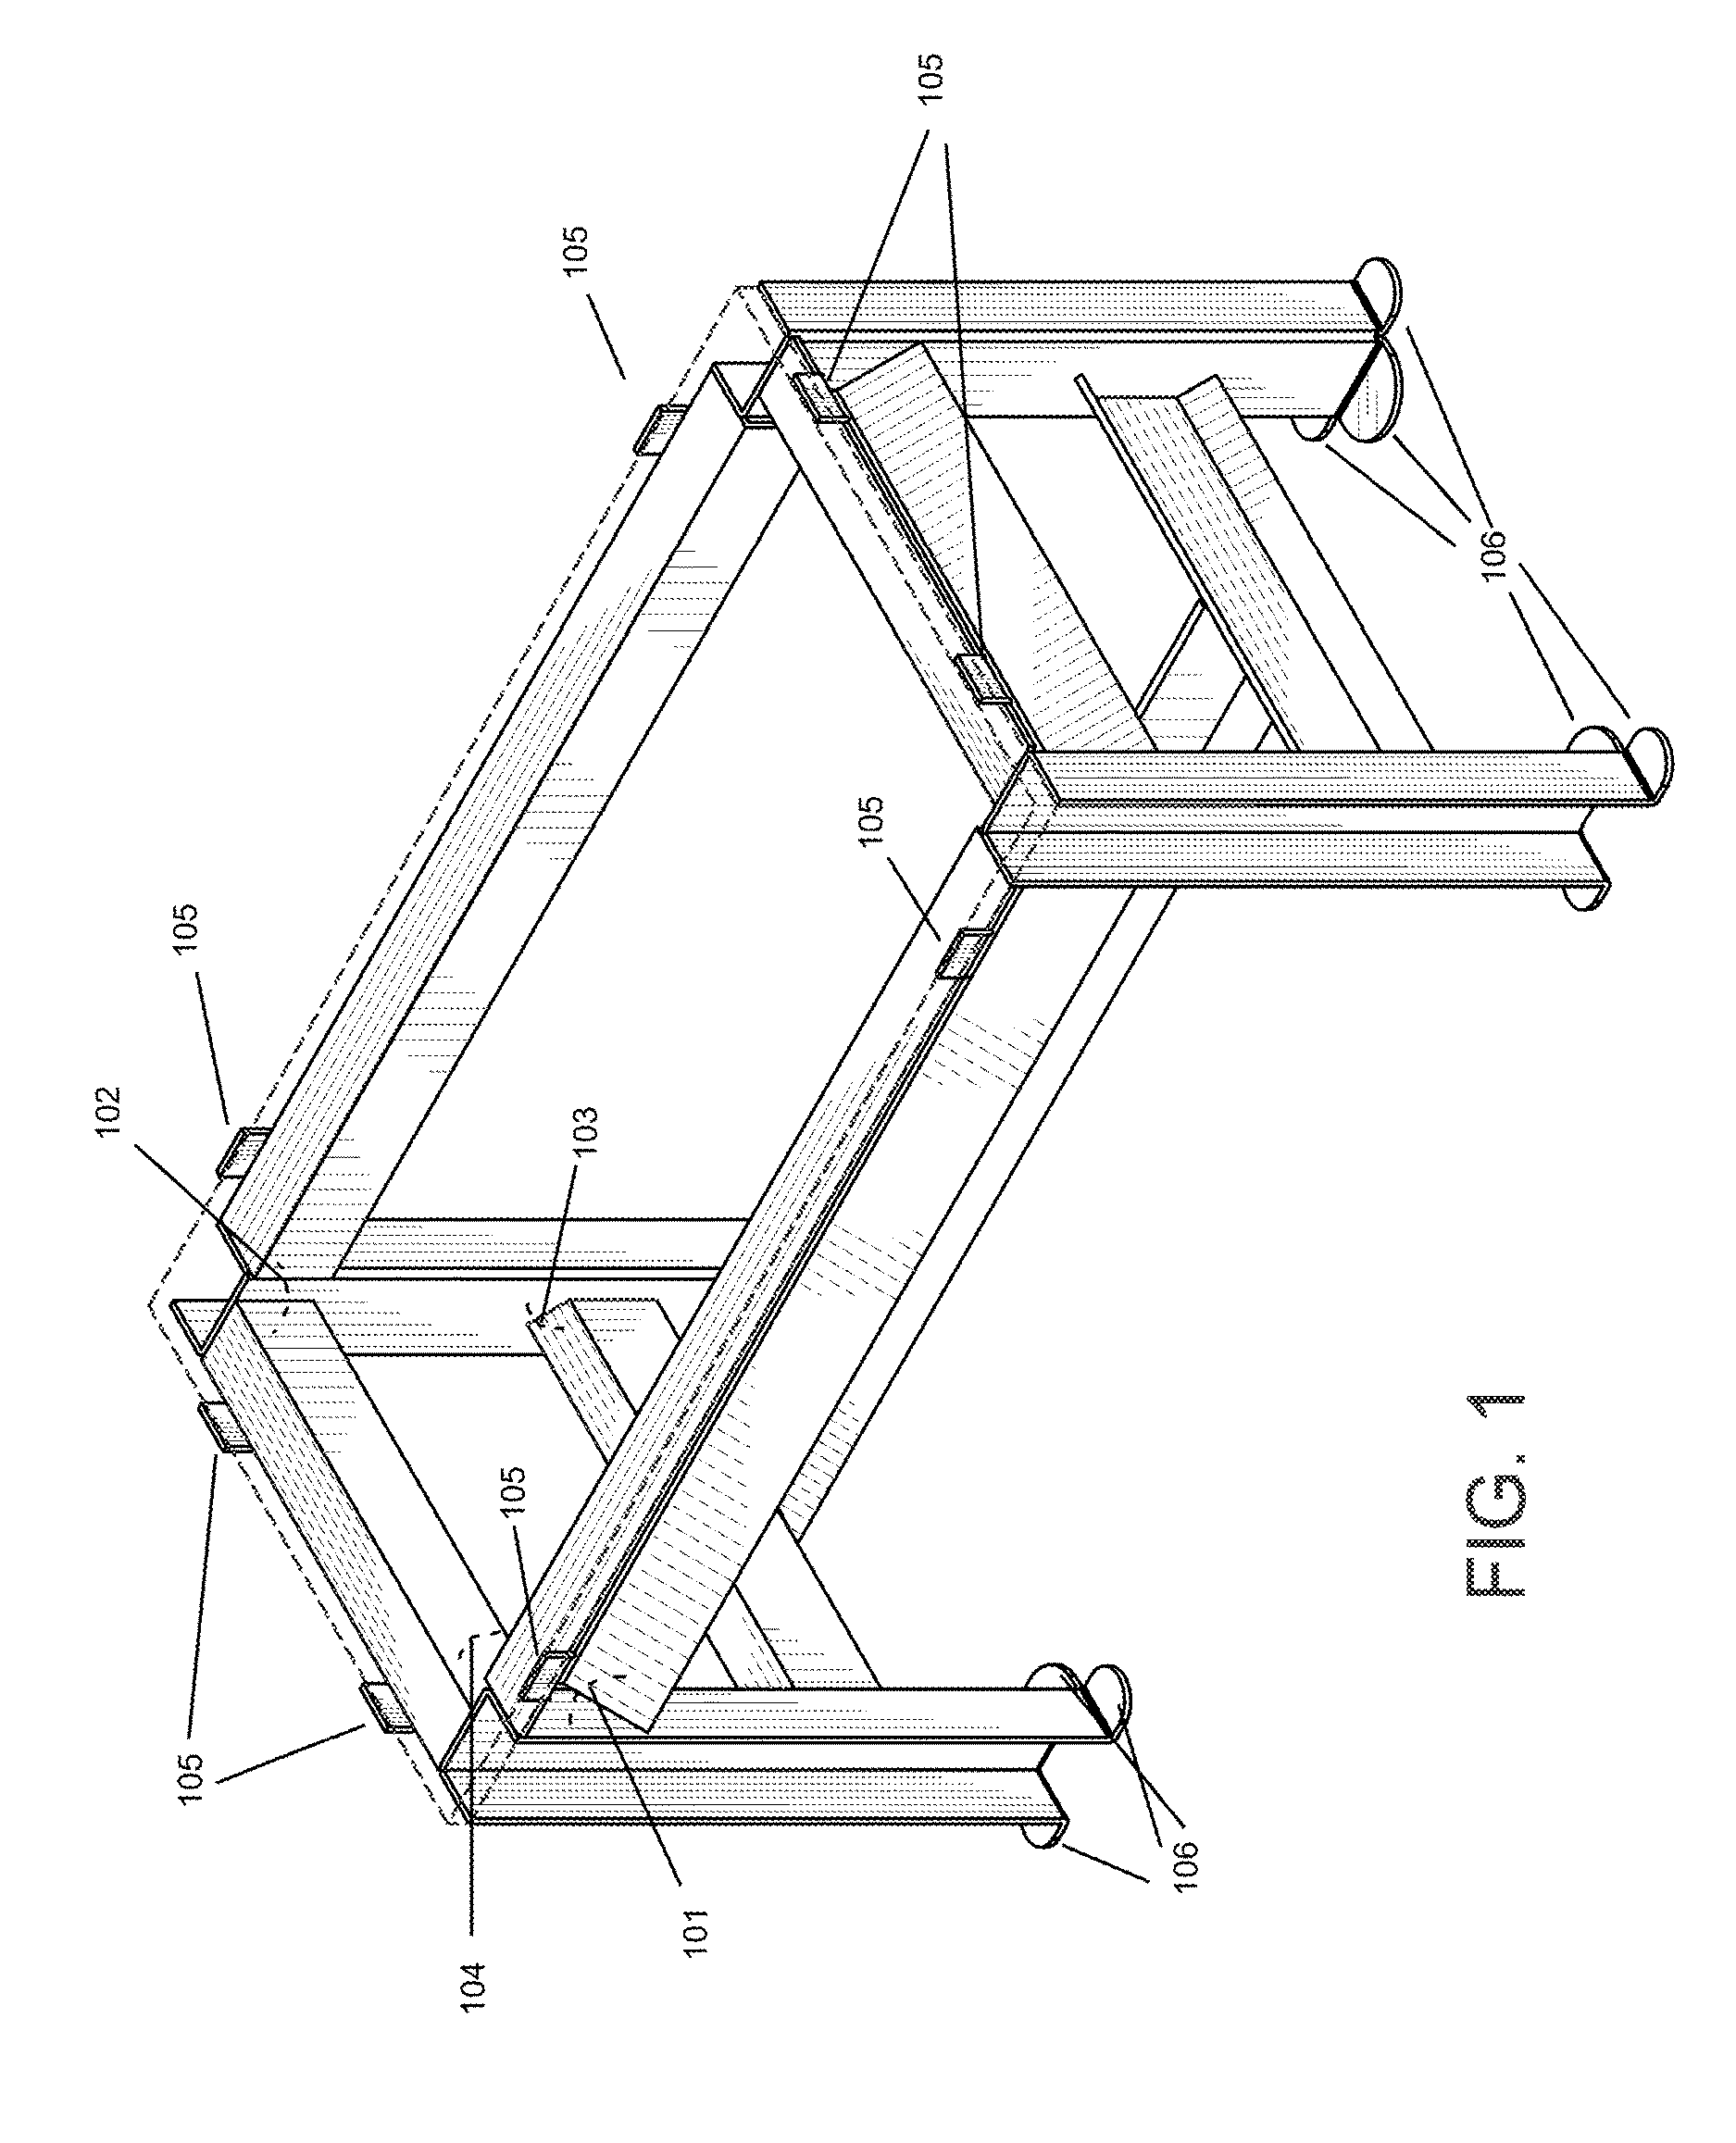 Sterilizable platform with configurable frame and method of constructing